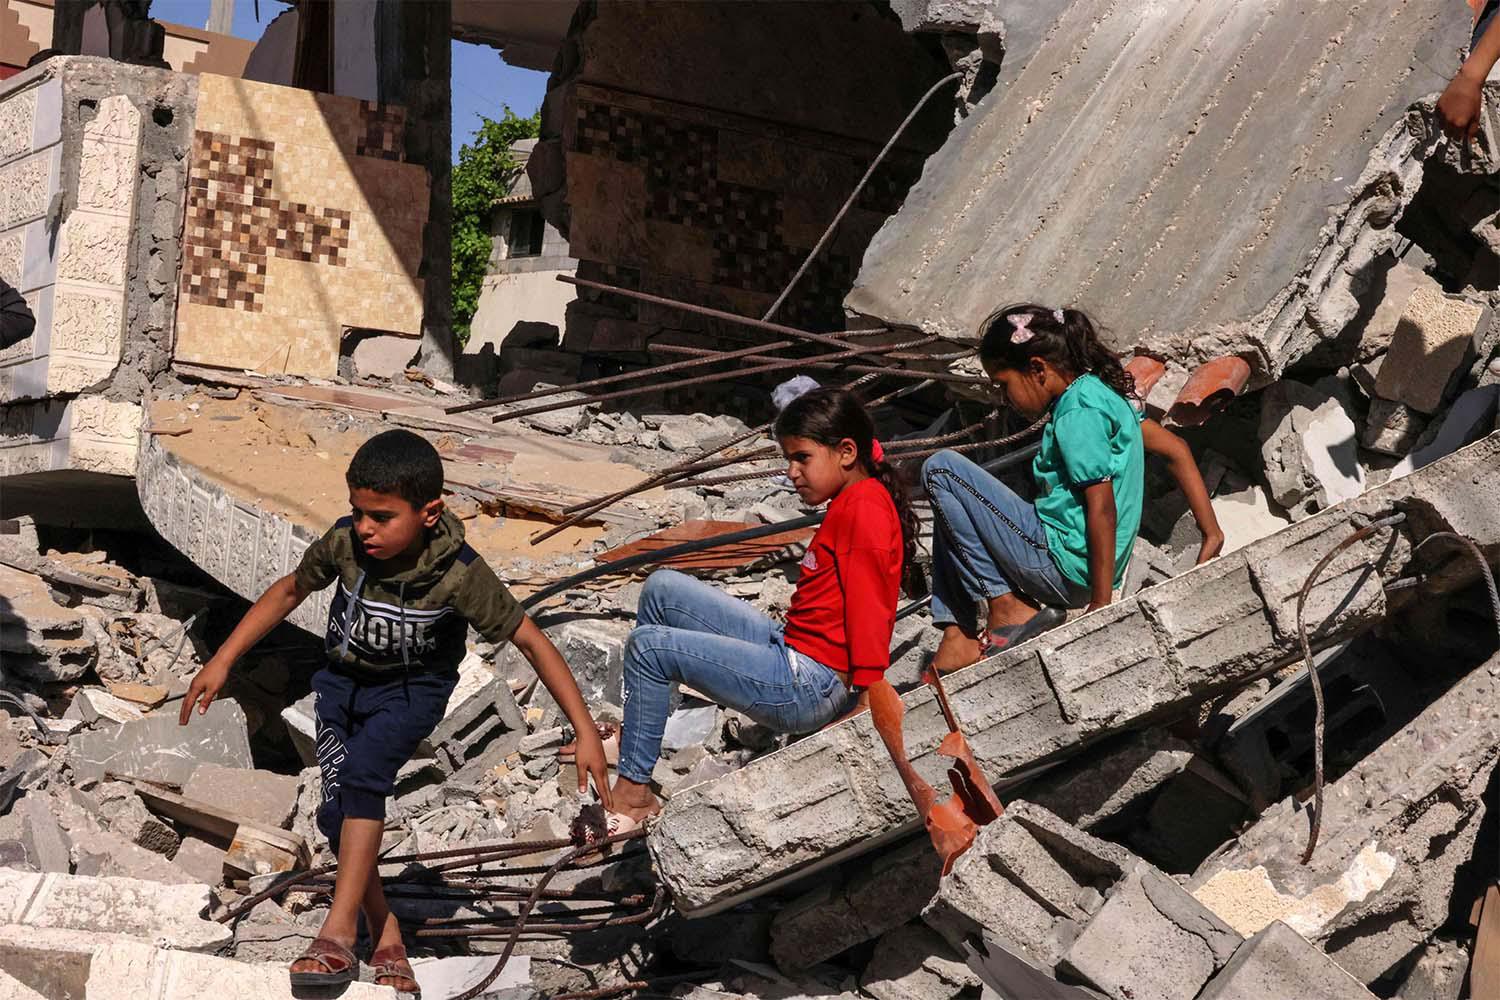 Israel pounded Gaza, destroying many buildings inhabited by civilians